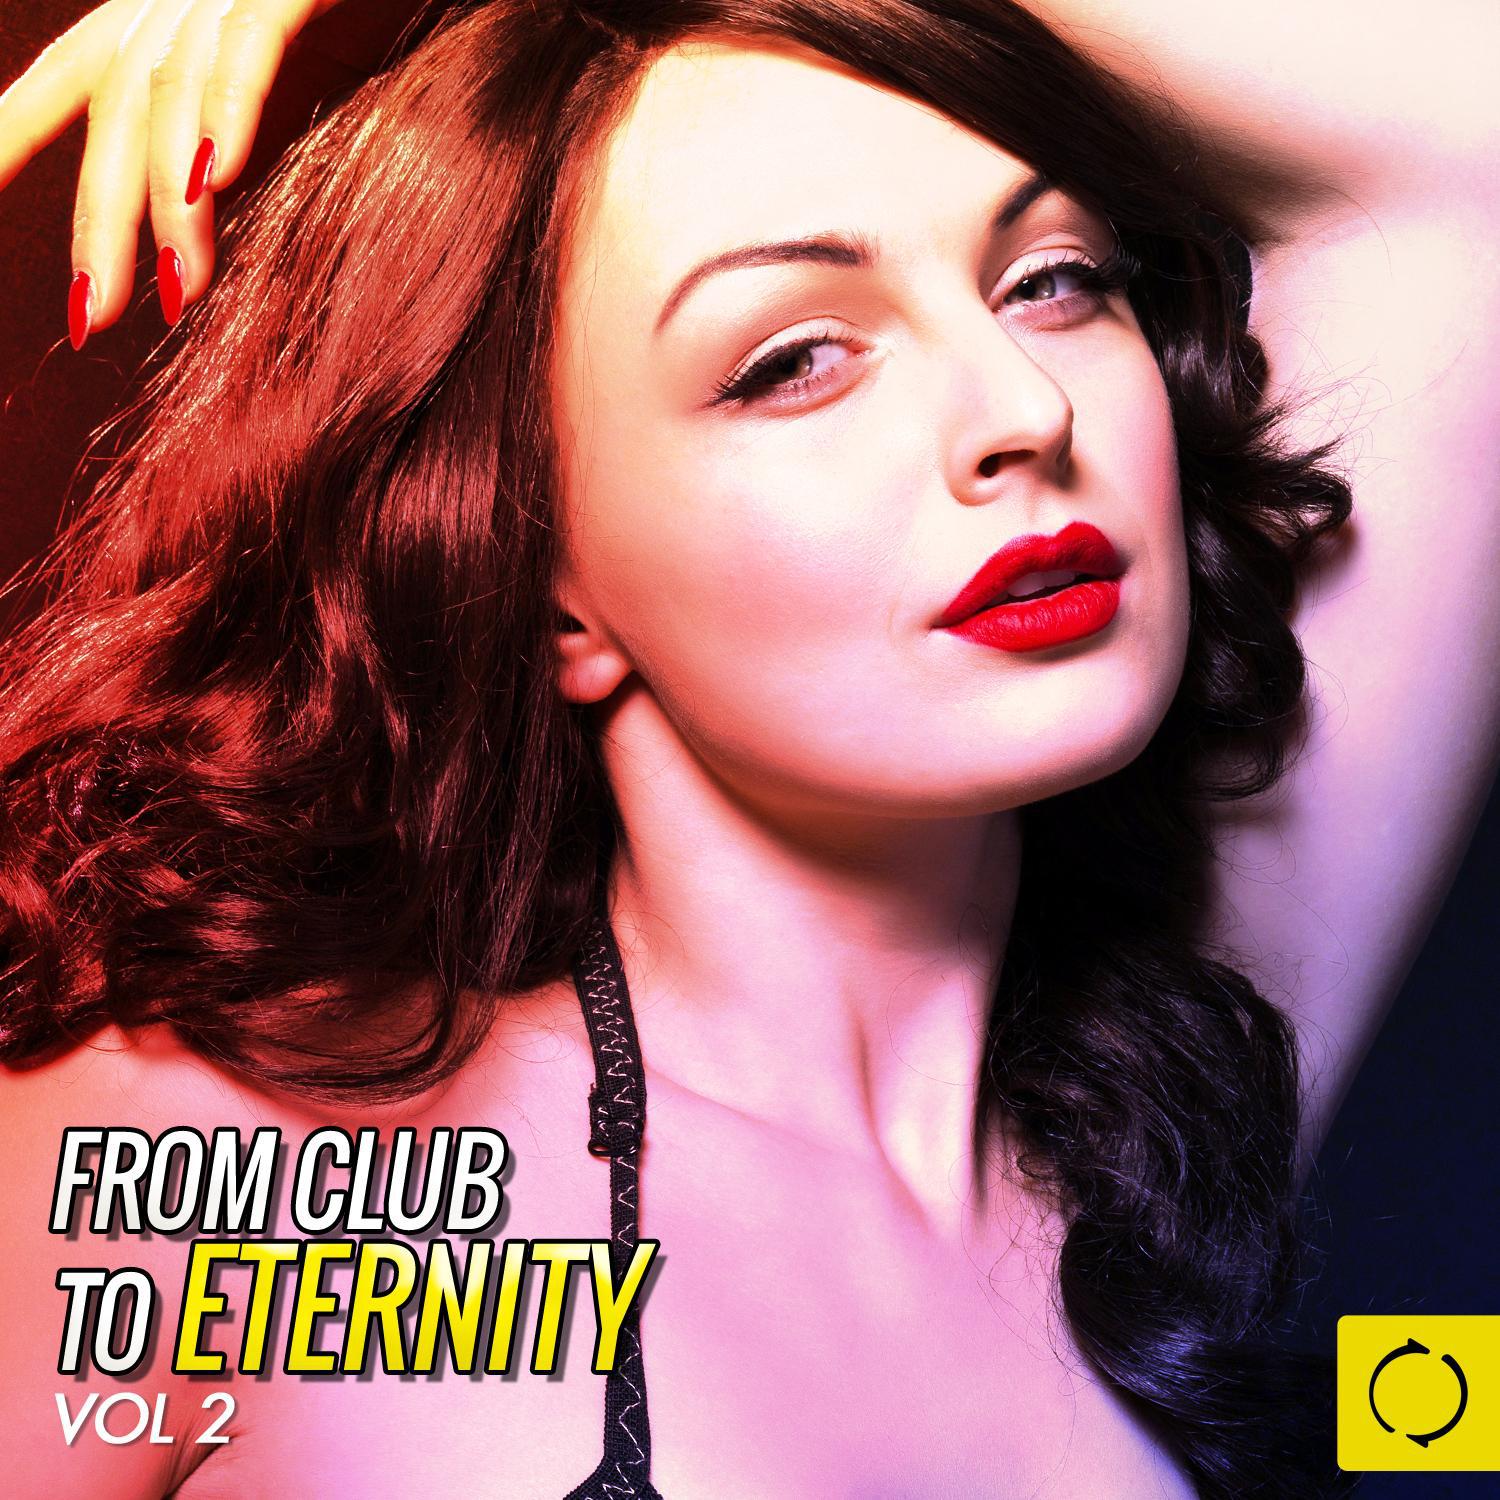 From Club to Eternity, Vol. 2